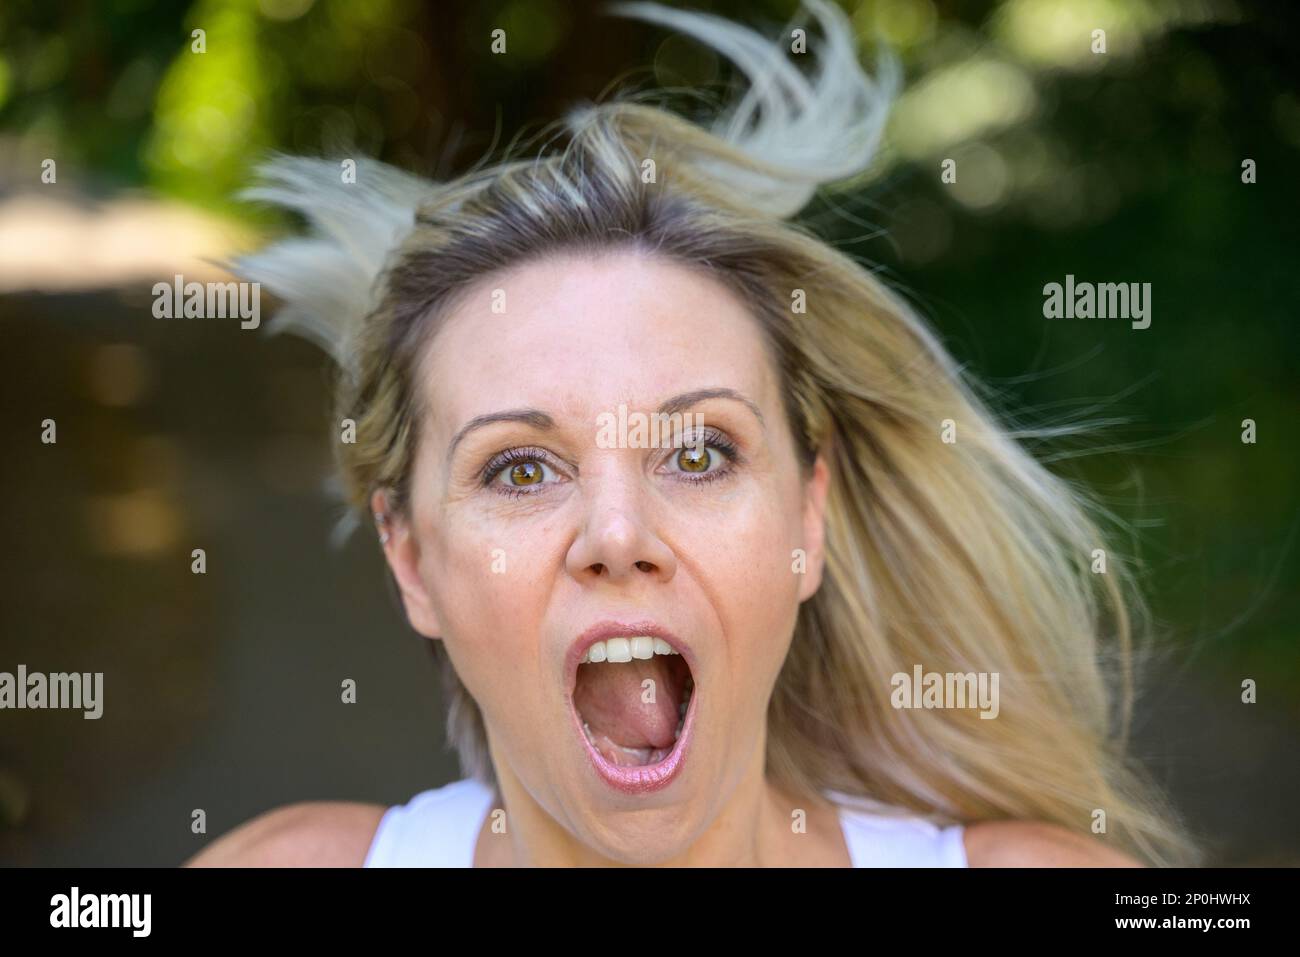 Angry middle aged woman yelling at the camera in frustration outdoors in a garden Stock Photo